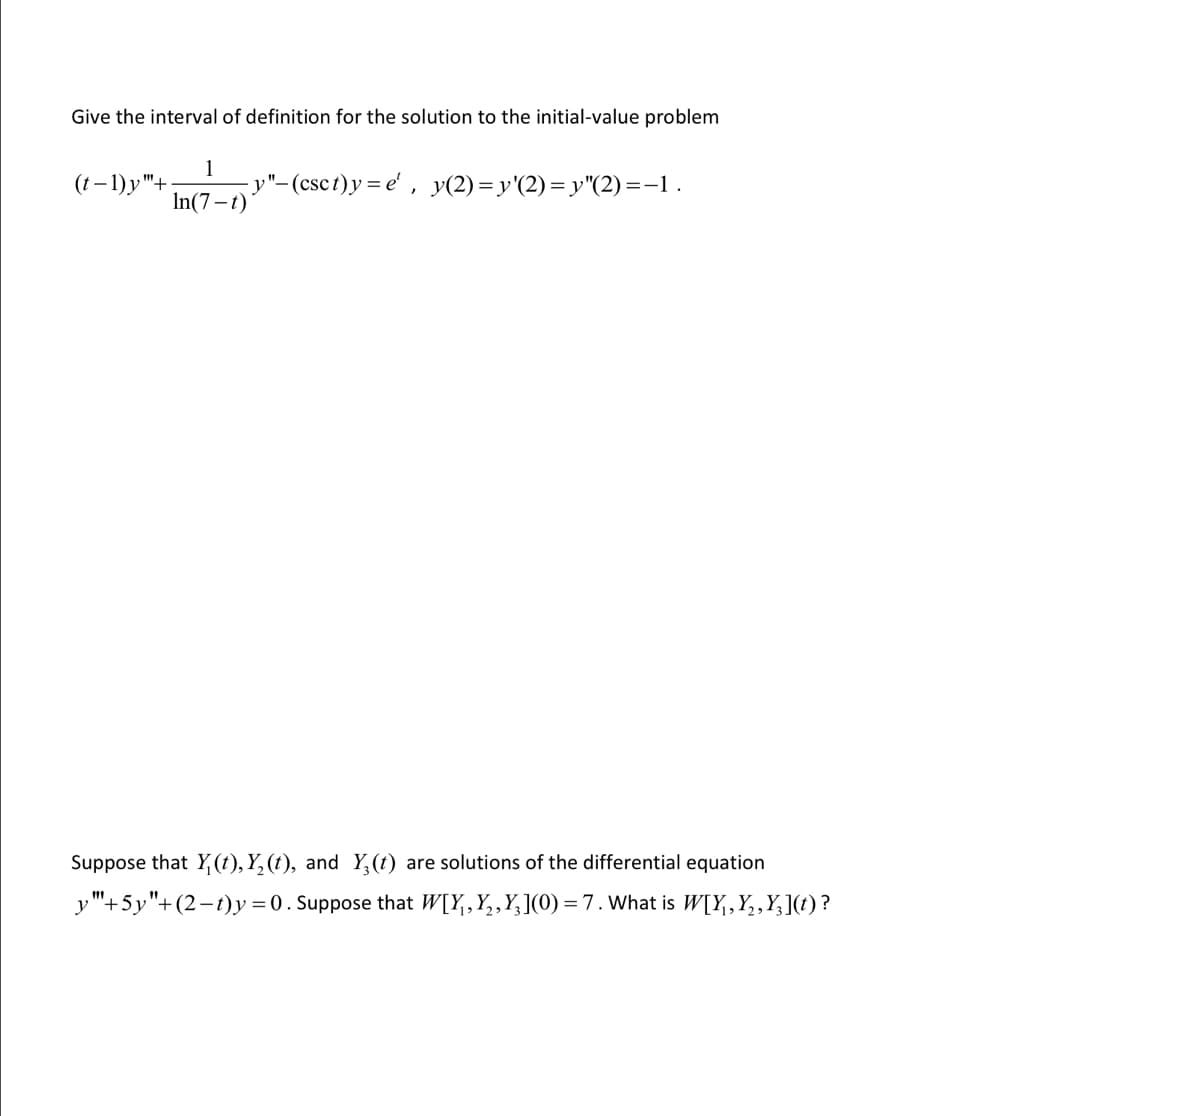 Give the interval of definition for the solution to the initial-value problem
(t−1)y"+
1
In(7-t)
-y"-(csct)y=e', y(2)=y'(2)=y"(2) =−1 .
Suppose that Y(t), Y₂ (t), and Y3 (t) are solutions of the differential equation
y"+5y"+(2-t)y=0. Suppose that W[X₁, X₂, X₂](0) = 7. What is W[Y,Y₂‚Y₂](t) ?